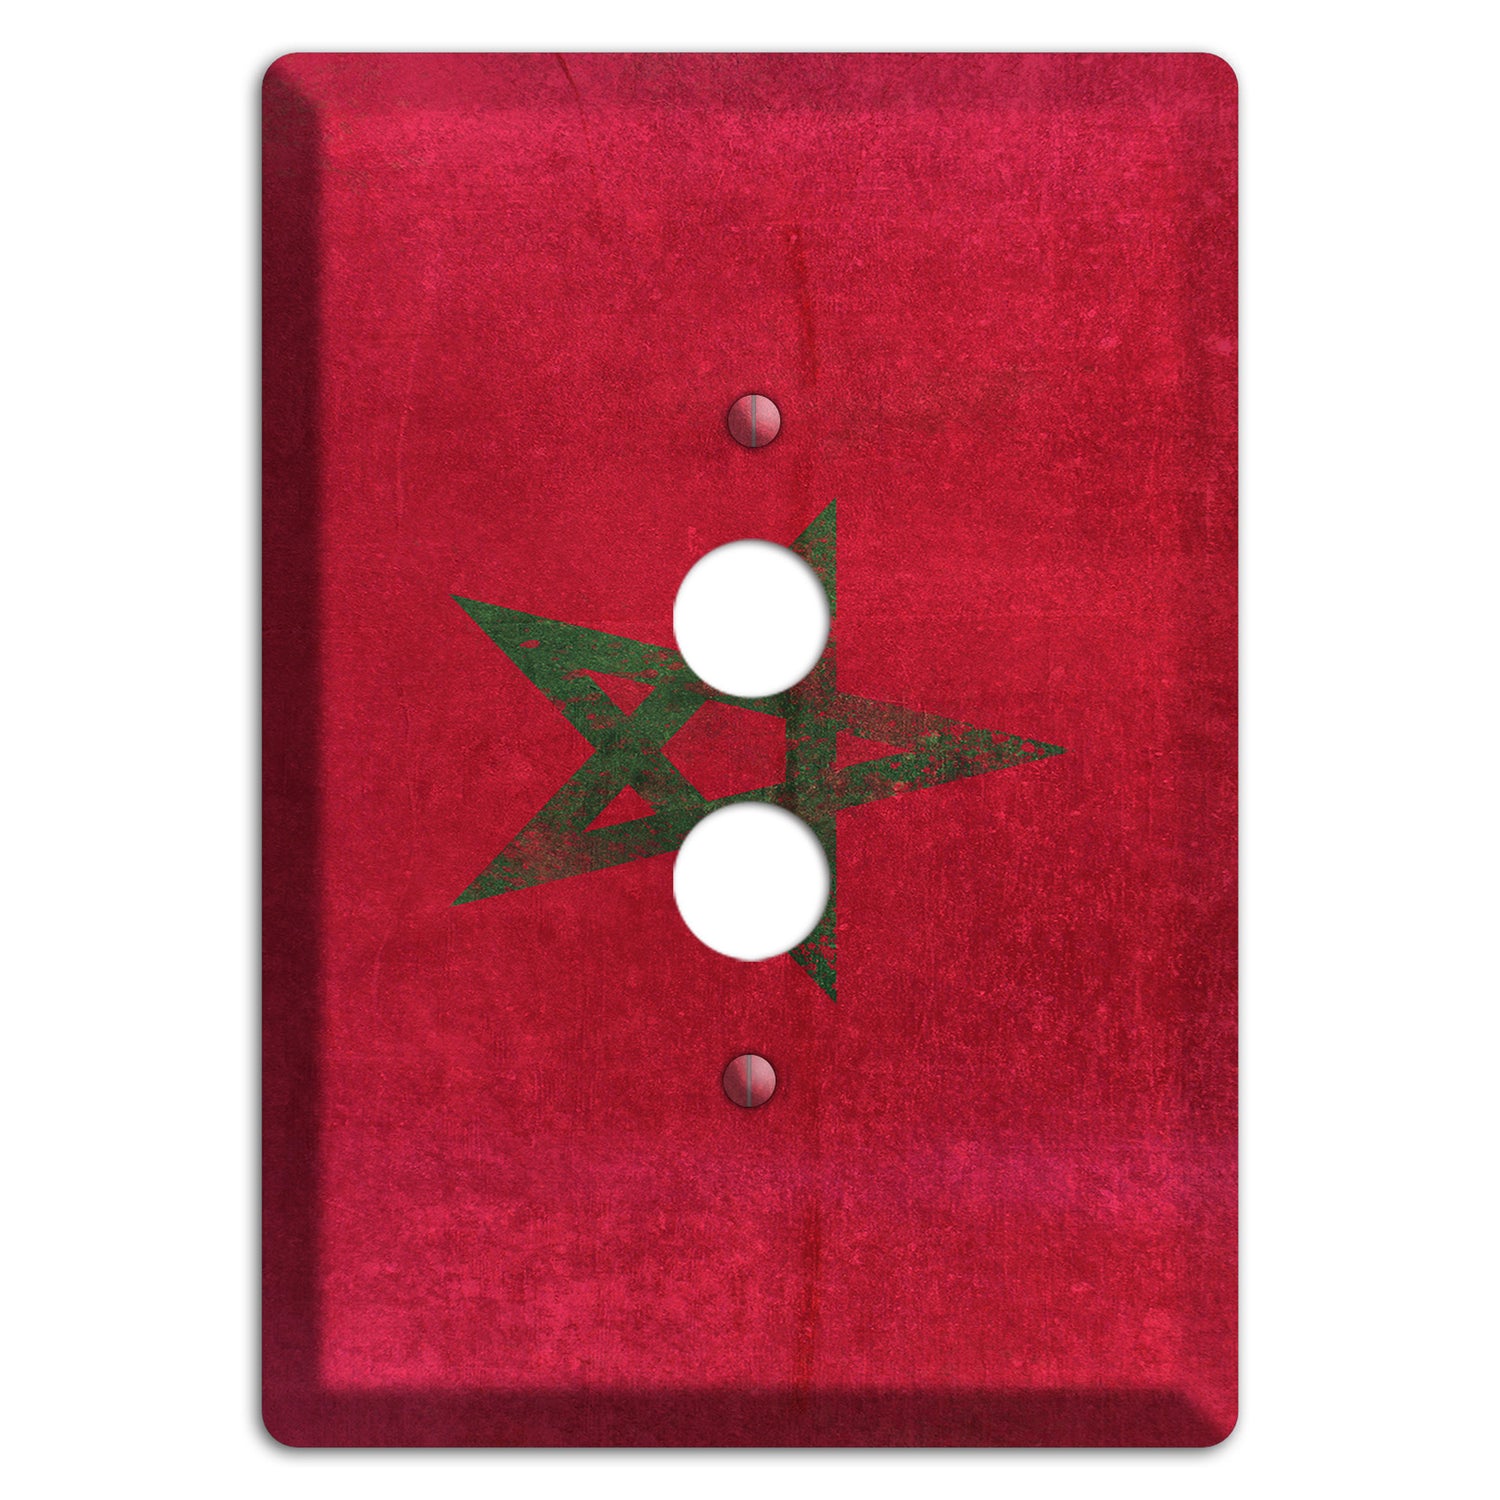 Morocco Cover Plates 1 Pushbutton Wallplate